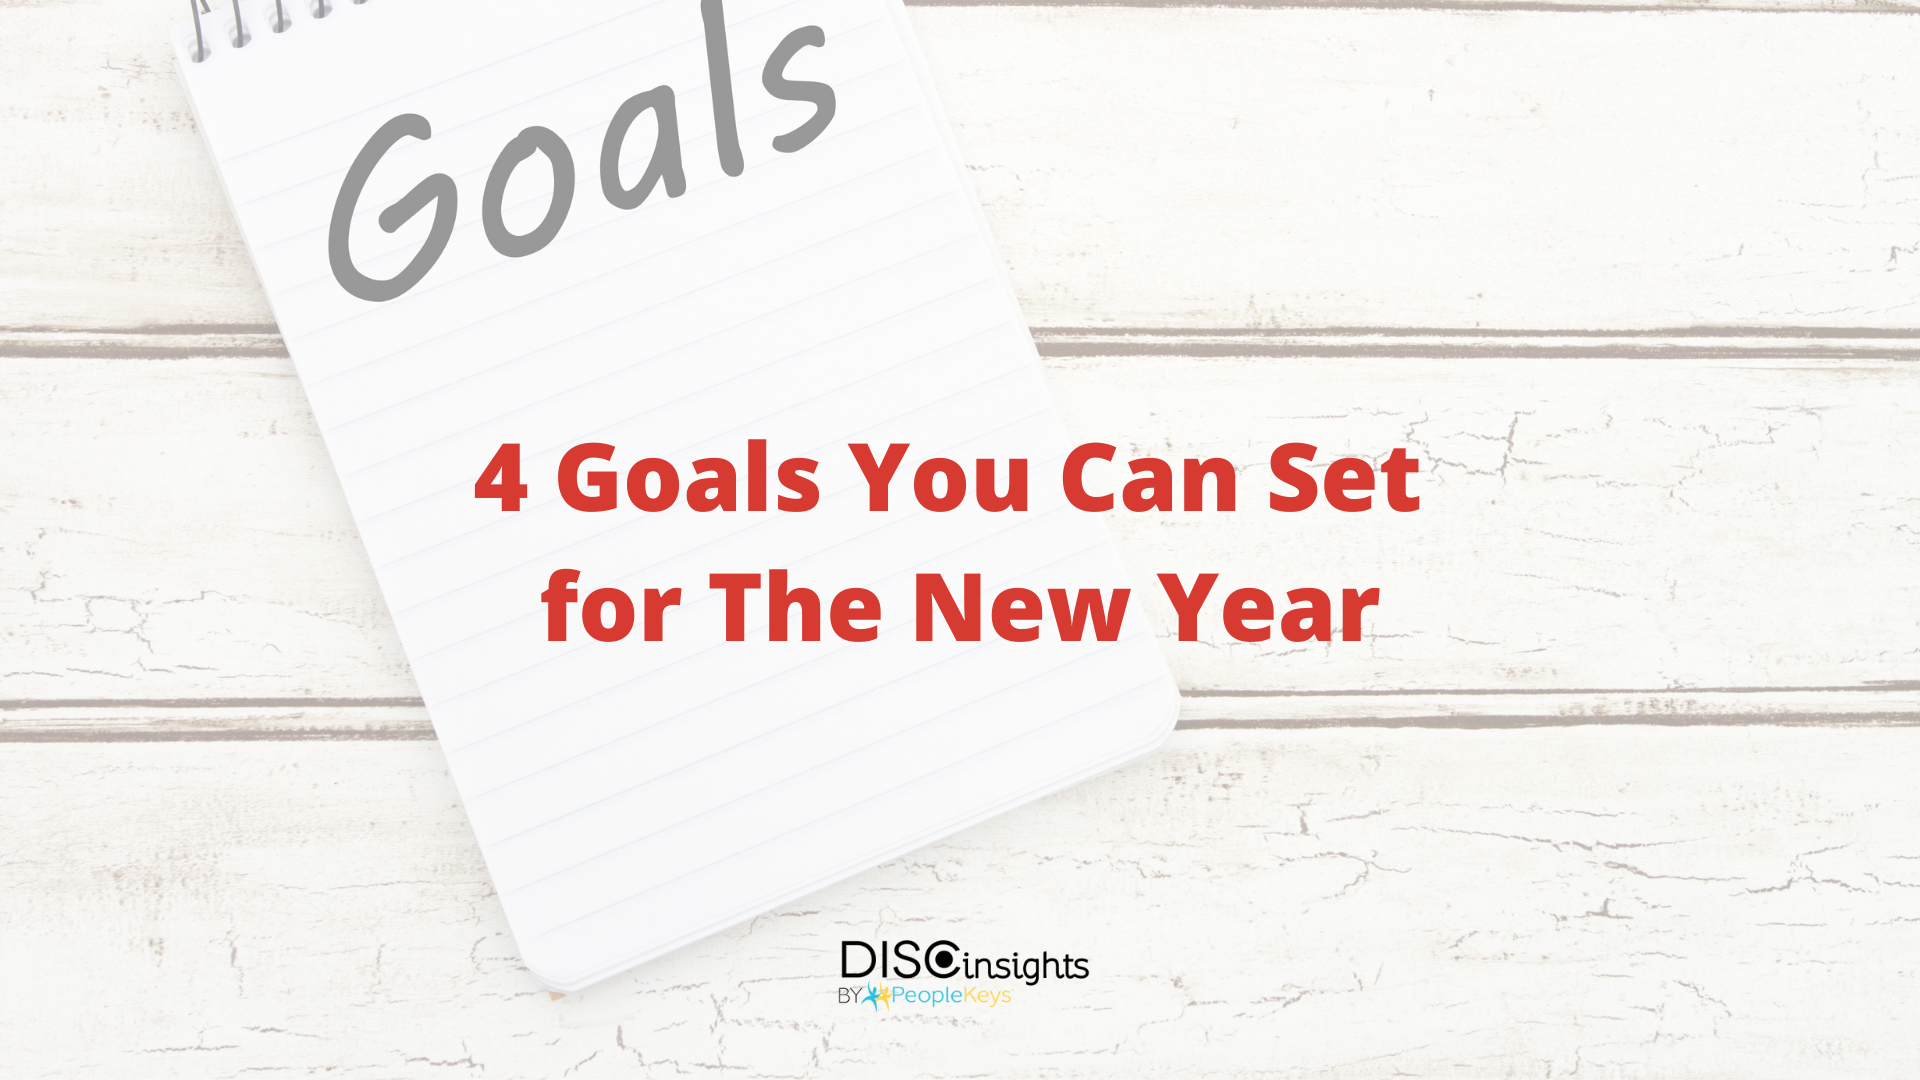 4 Goals You Can Set for The New Year